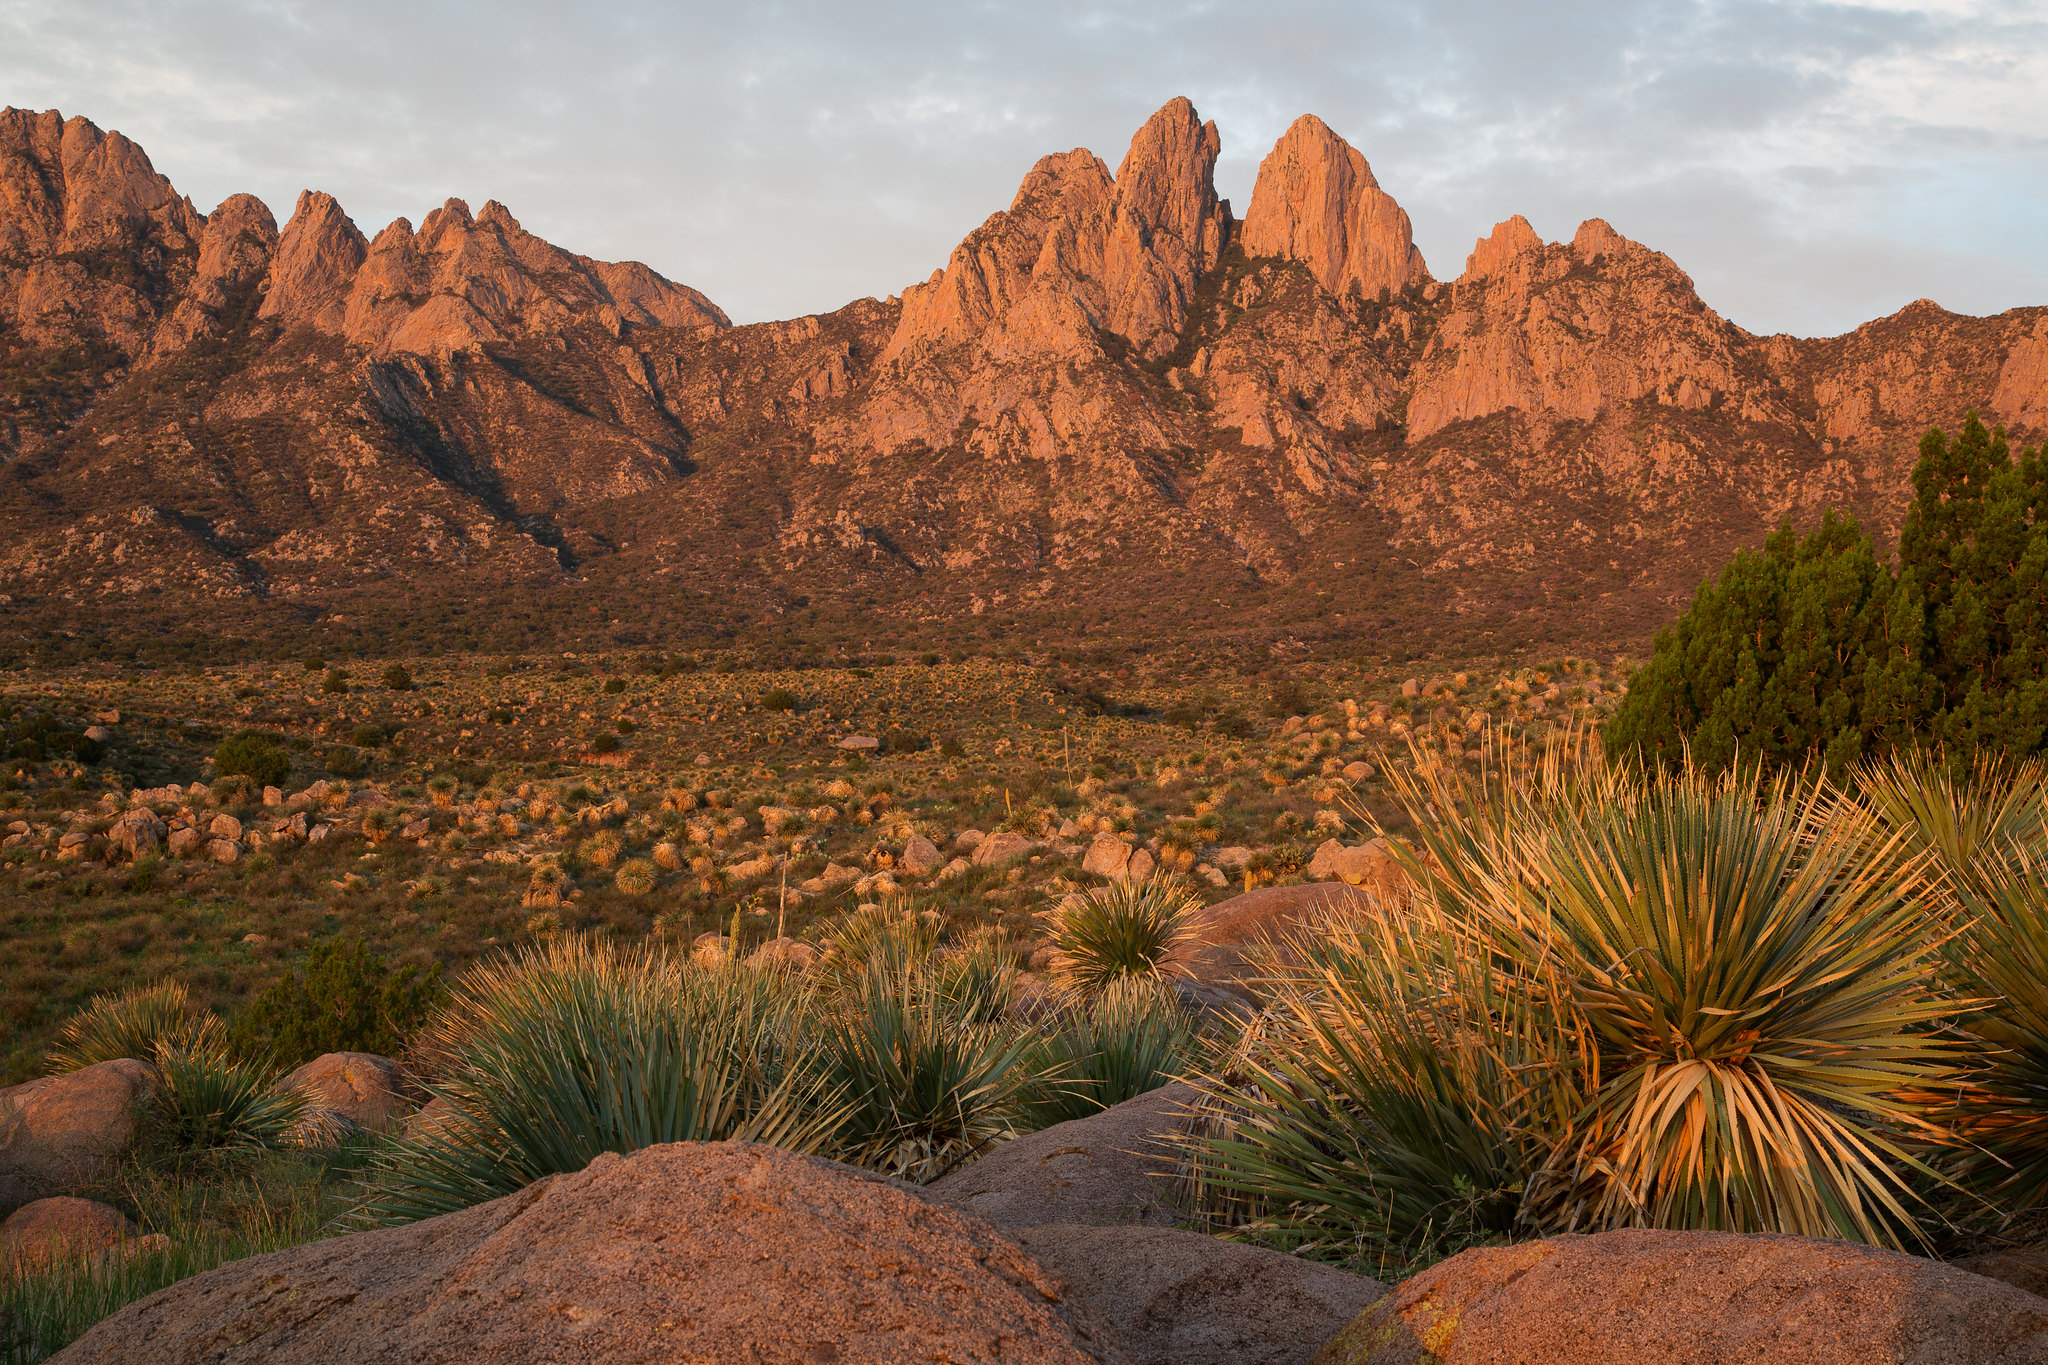 Sunset over the Organ Mountains near Las Cruces, New Mexico.